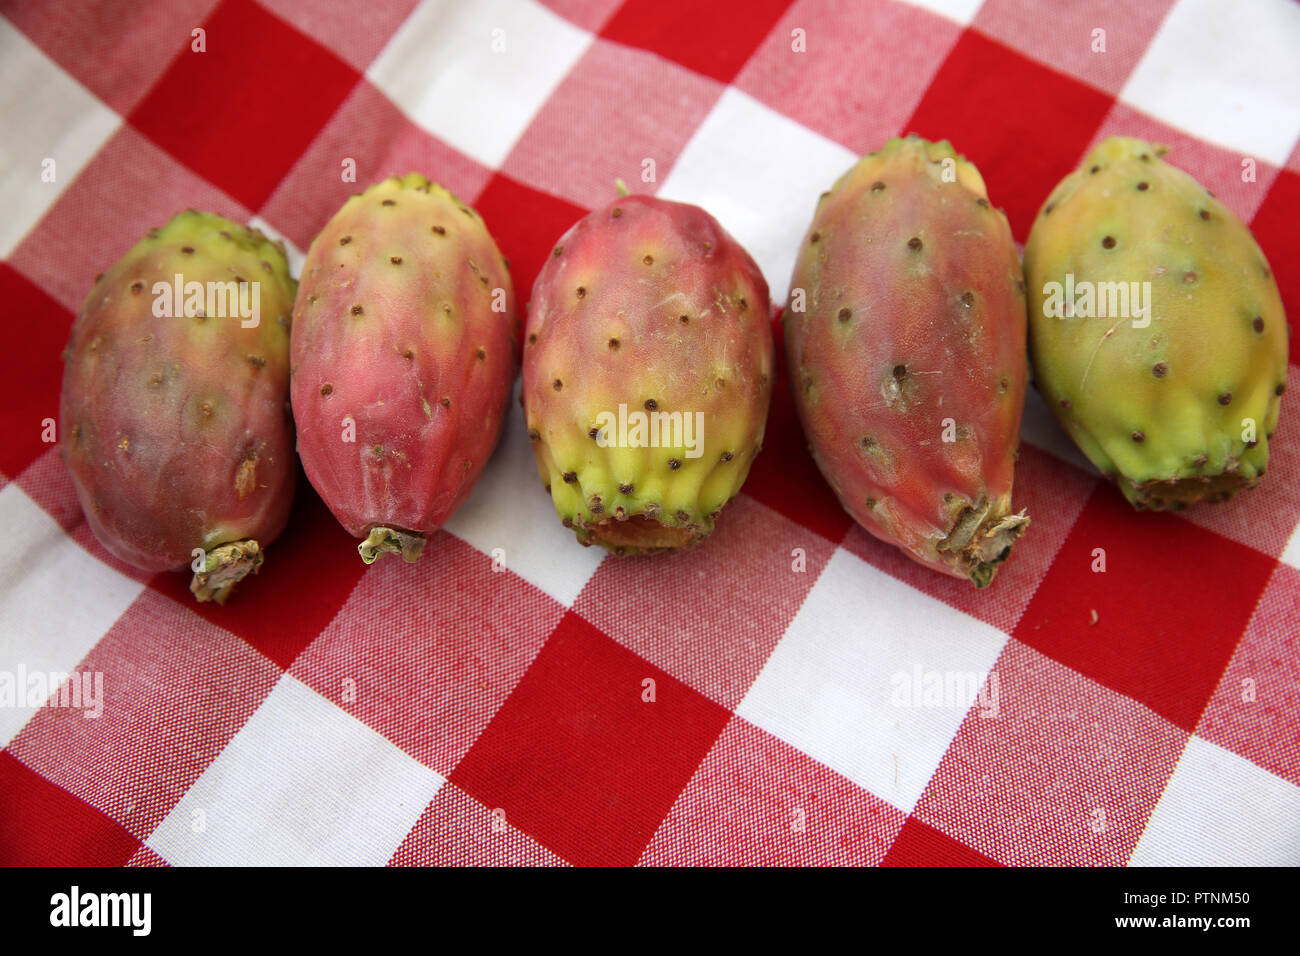 Prickly Pears Stock Photo